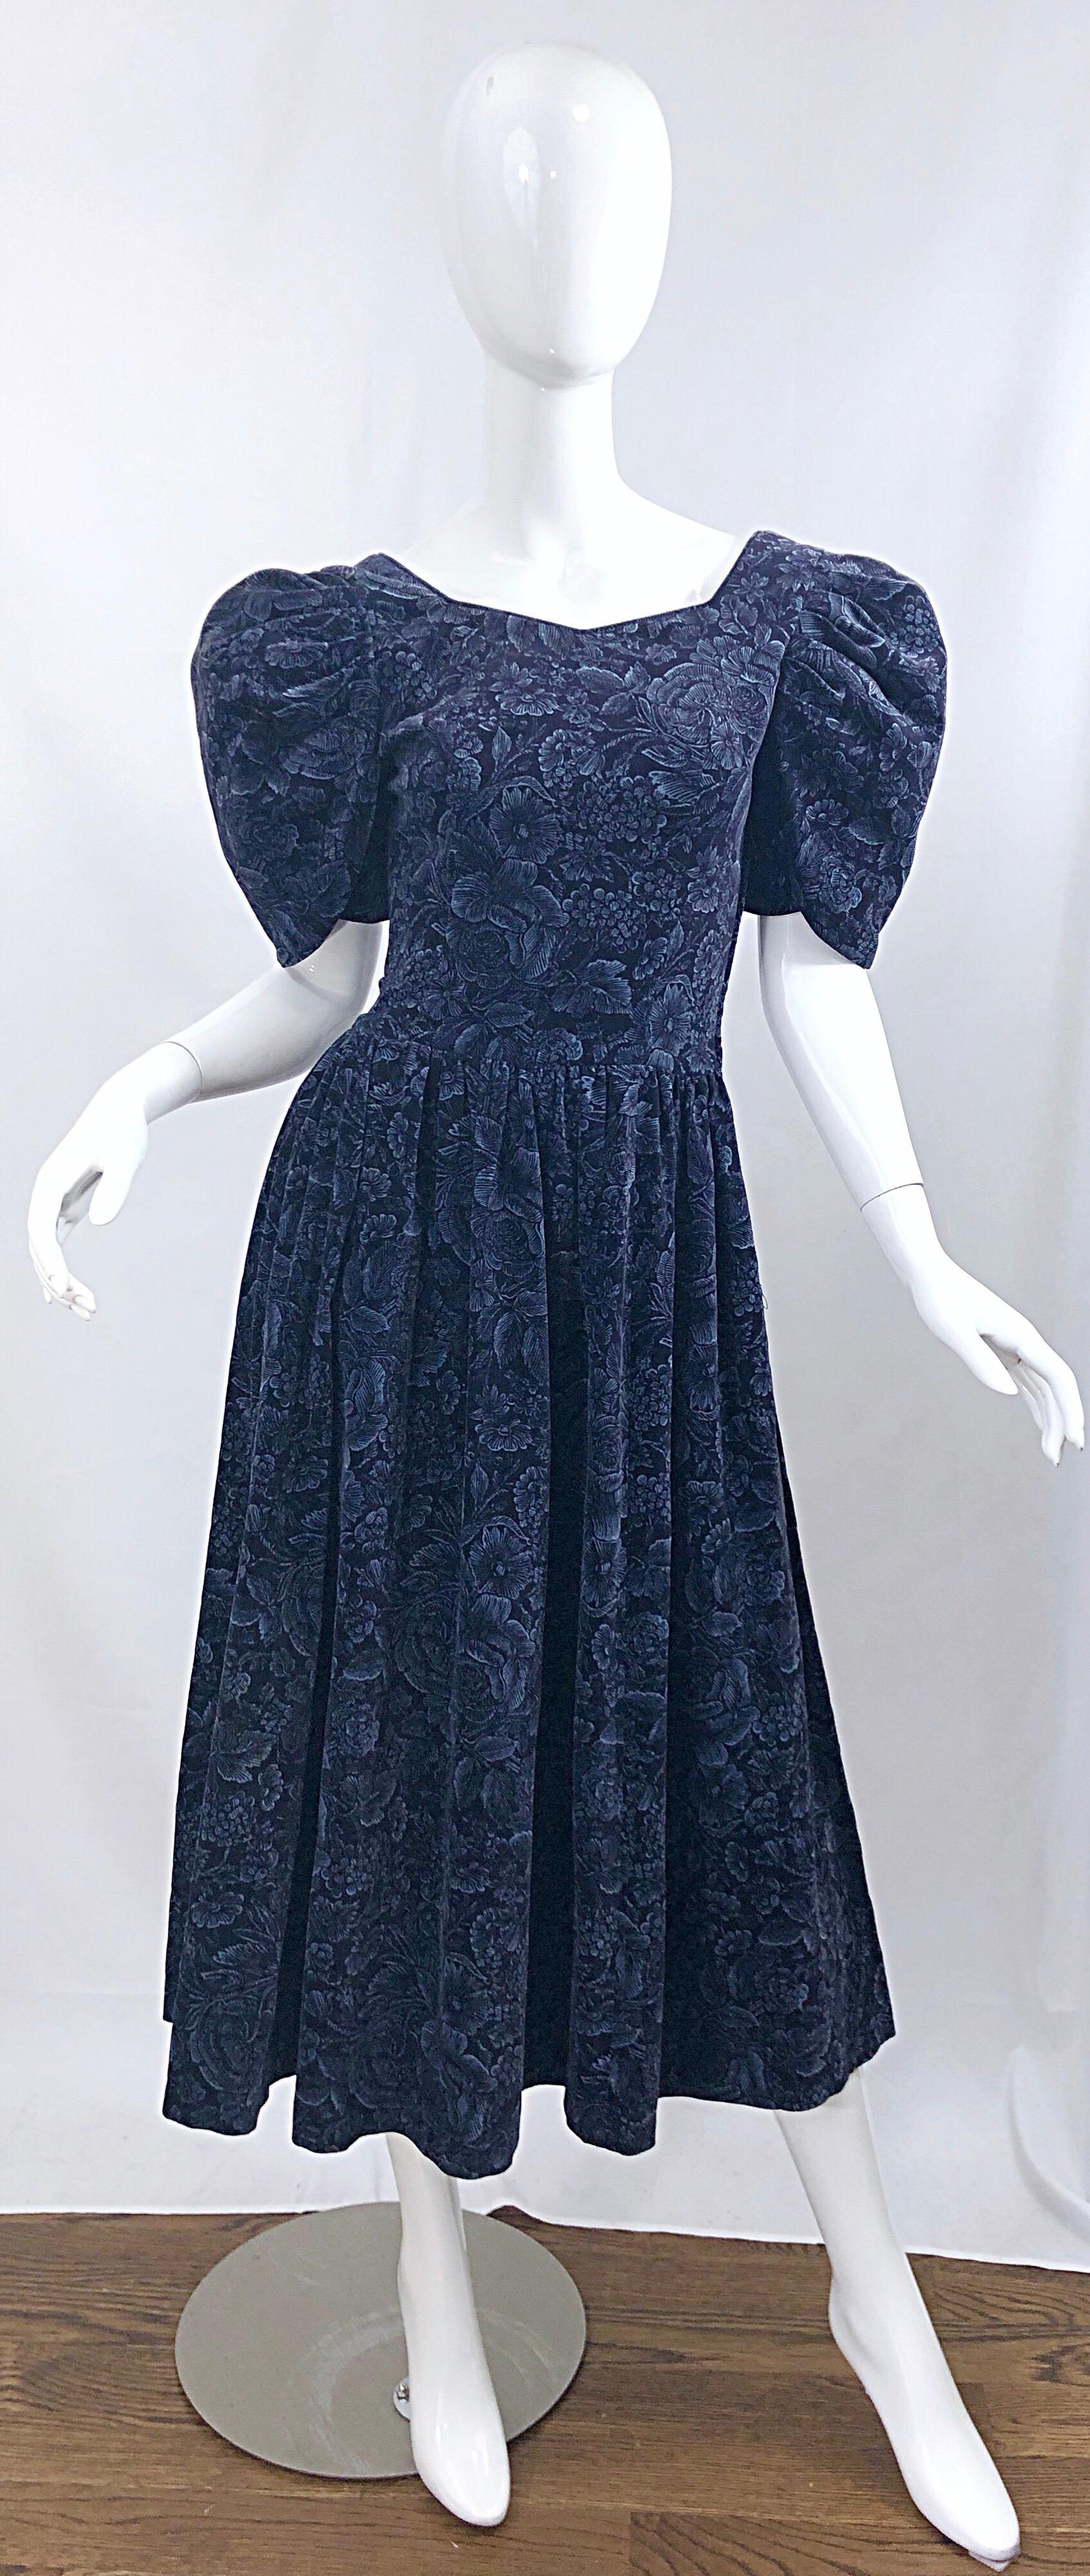 Chic early 1980s LAURA ASHLEY original Bathsheba Collection—So rare to find! Navy blue velvet open-back flower print mid dress! Features puff sleeves that add just the right amount of extra volume. Hidden zipper up the back with hook-and-eye